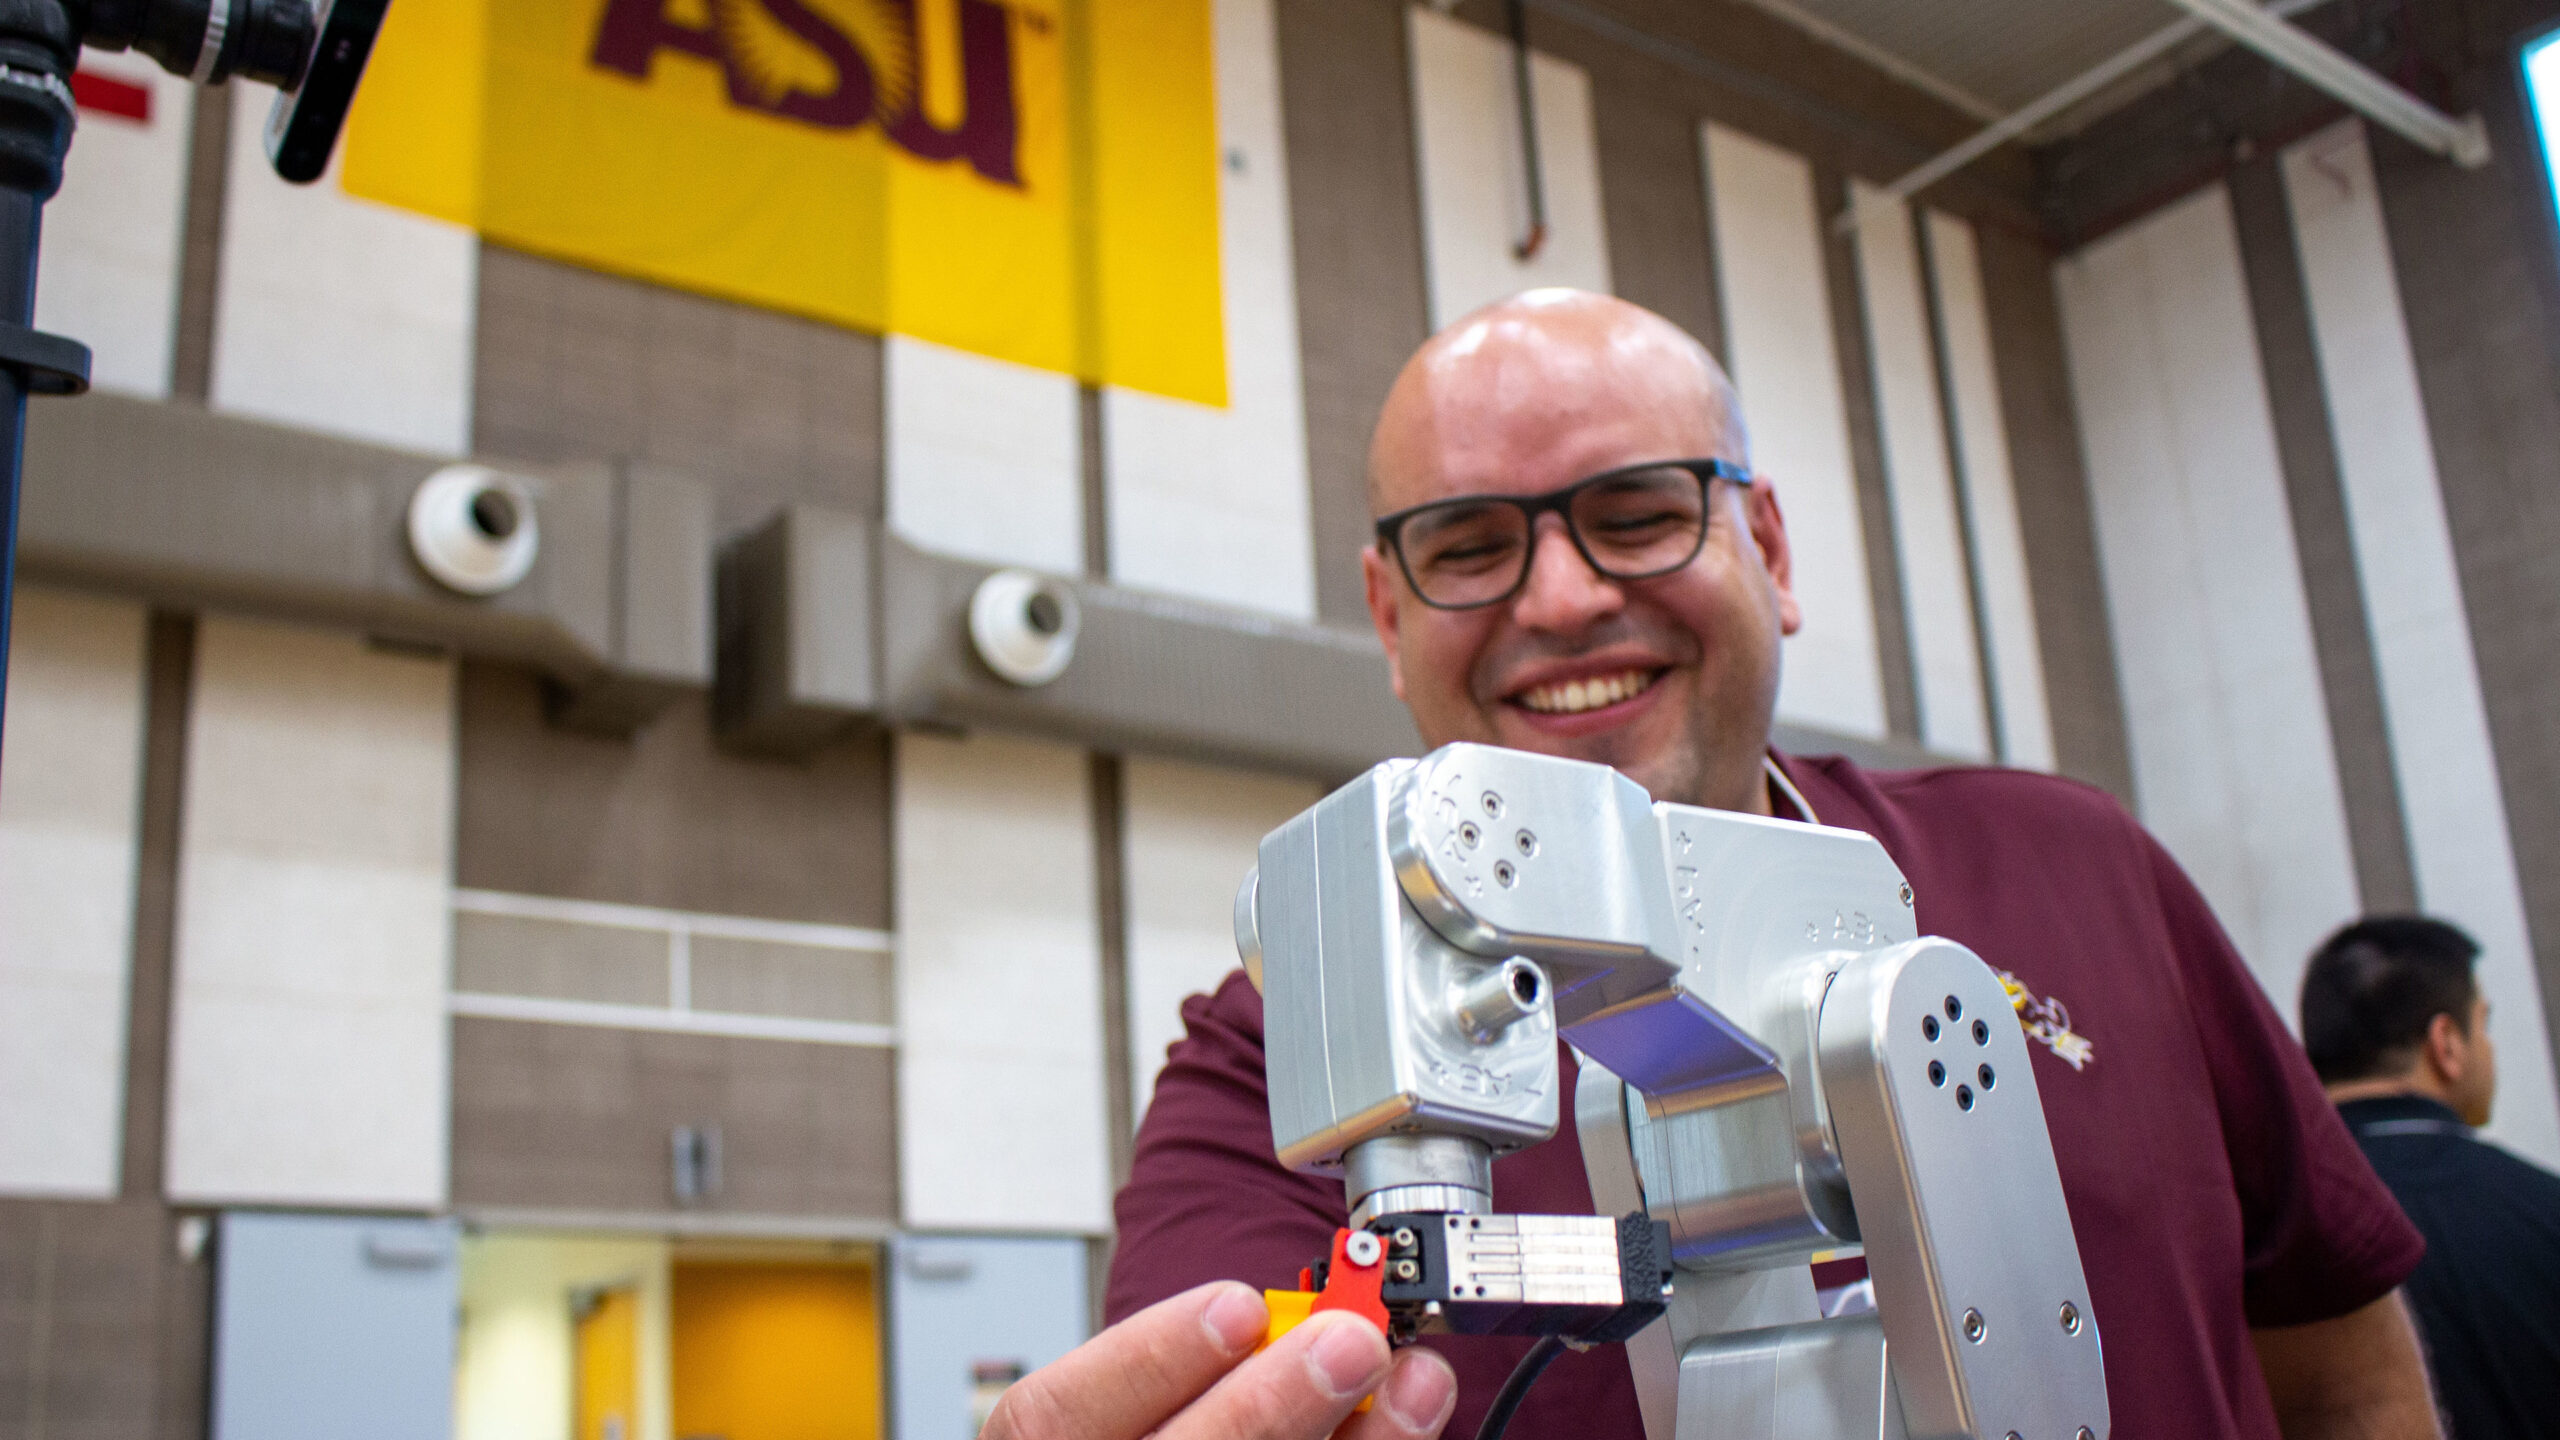 Spring 2023 Innovation Showcase at the Sun Devil Fitness Complex at ASU's Polytechnic campus